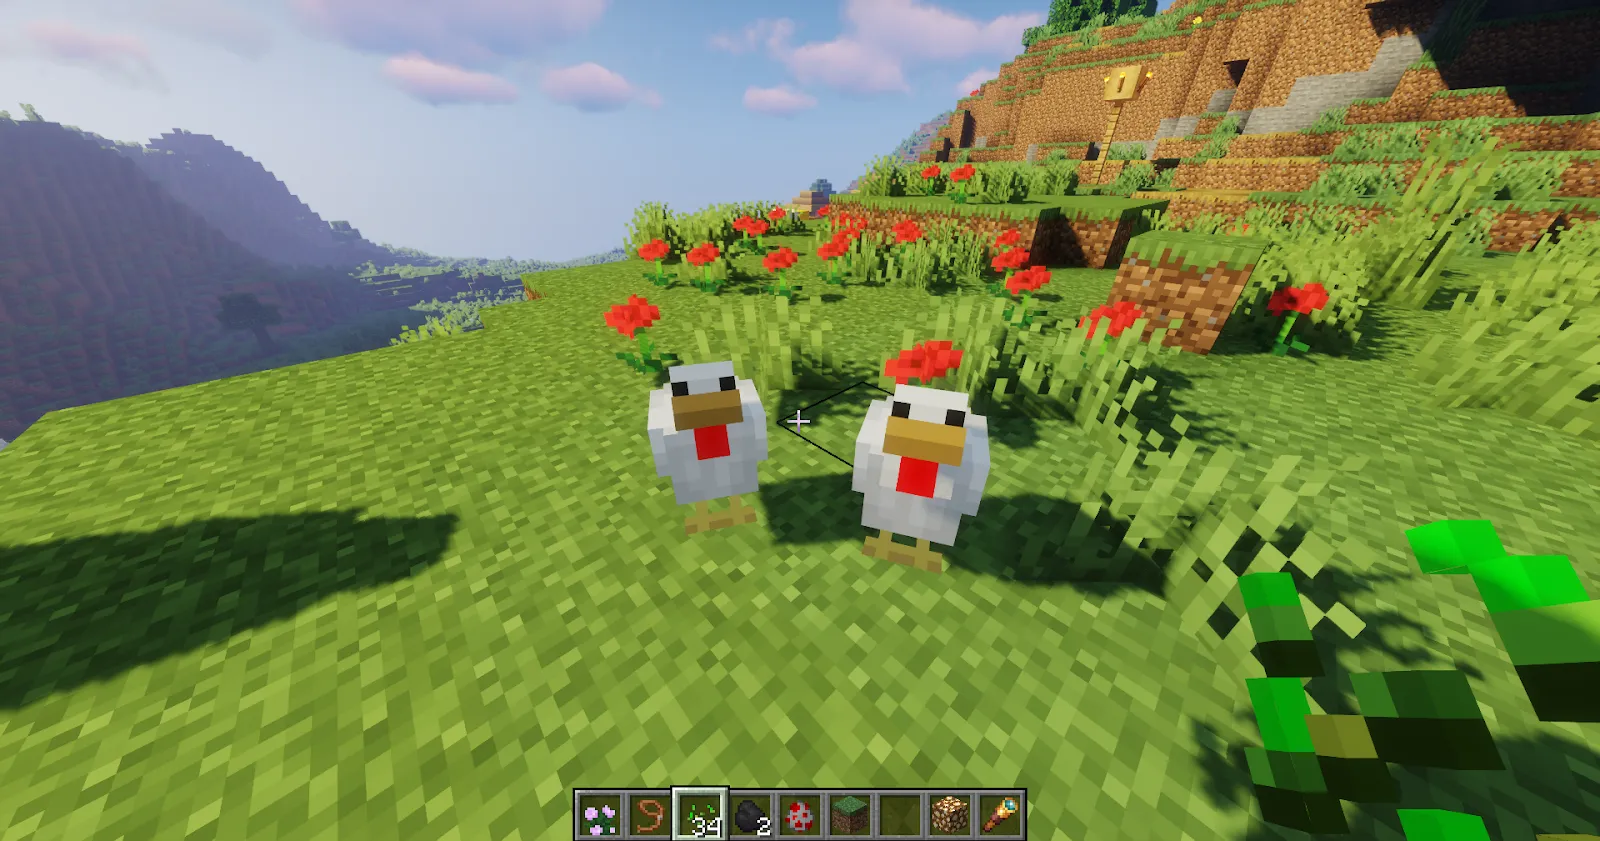 Requirements to breed Minecraft Chickens